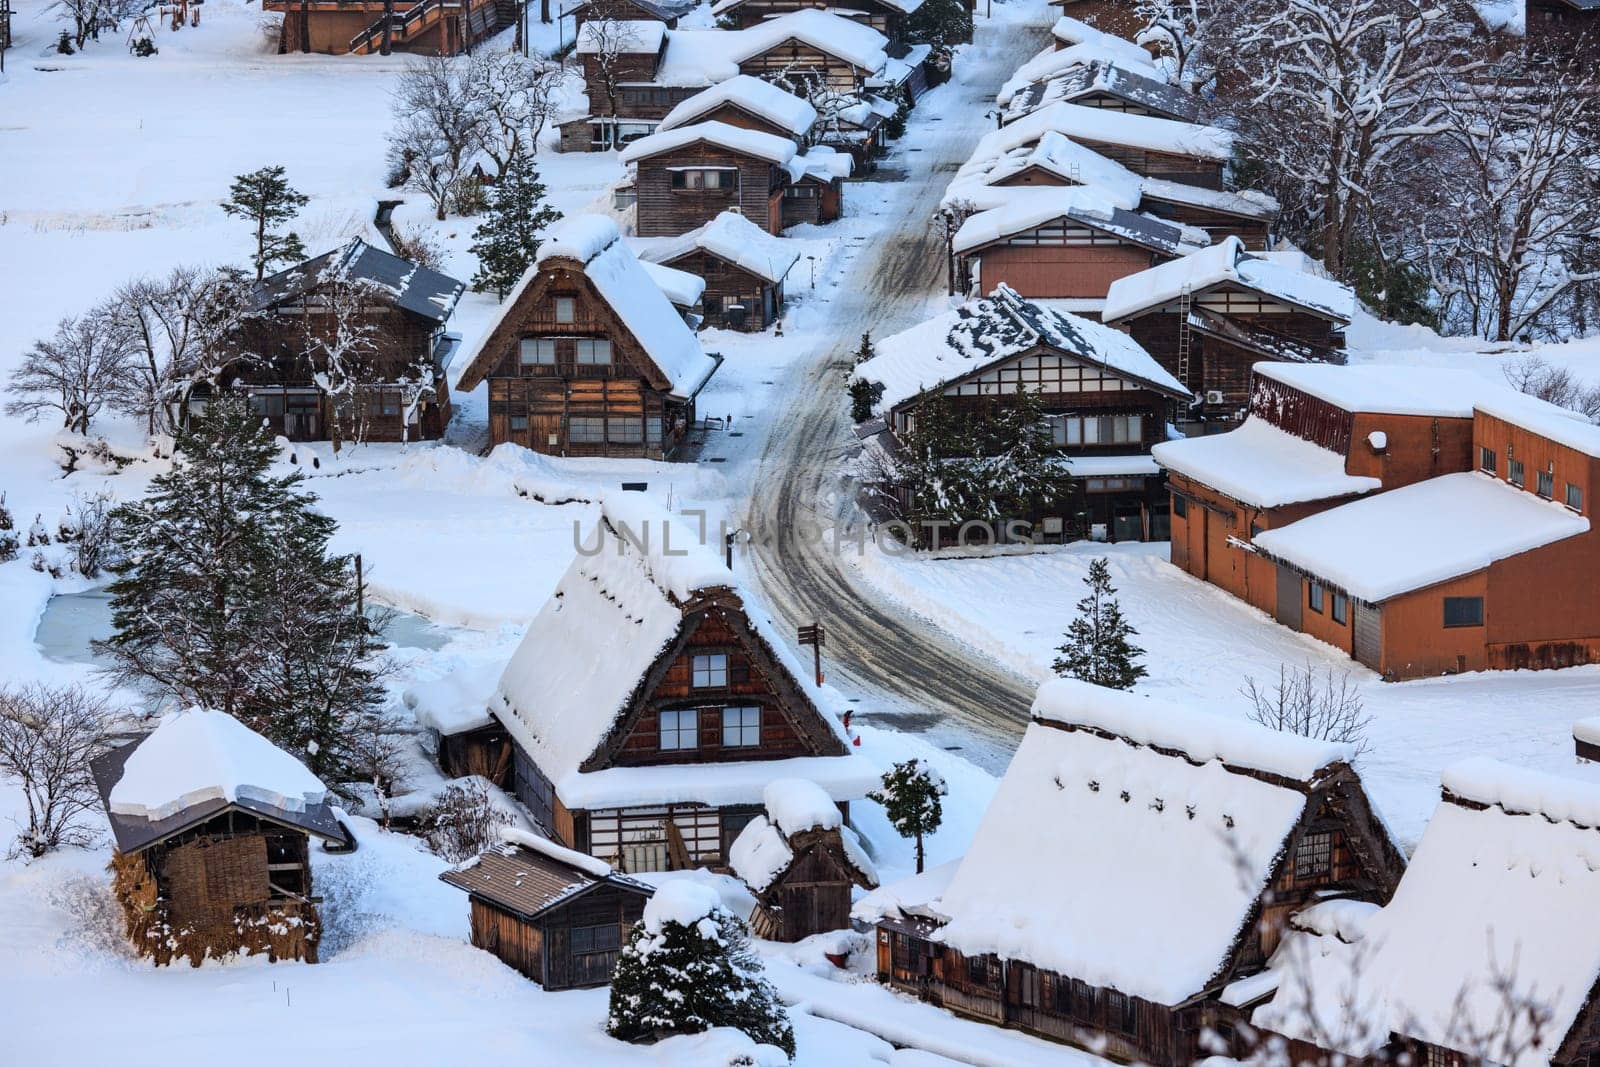 Snow covered A-frame roofs in historic Japanese mountain town in winter. High quality photo